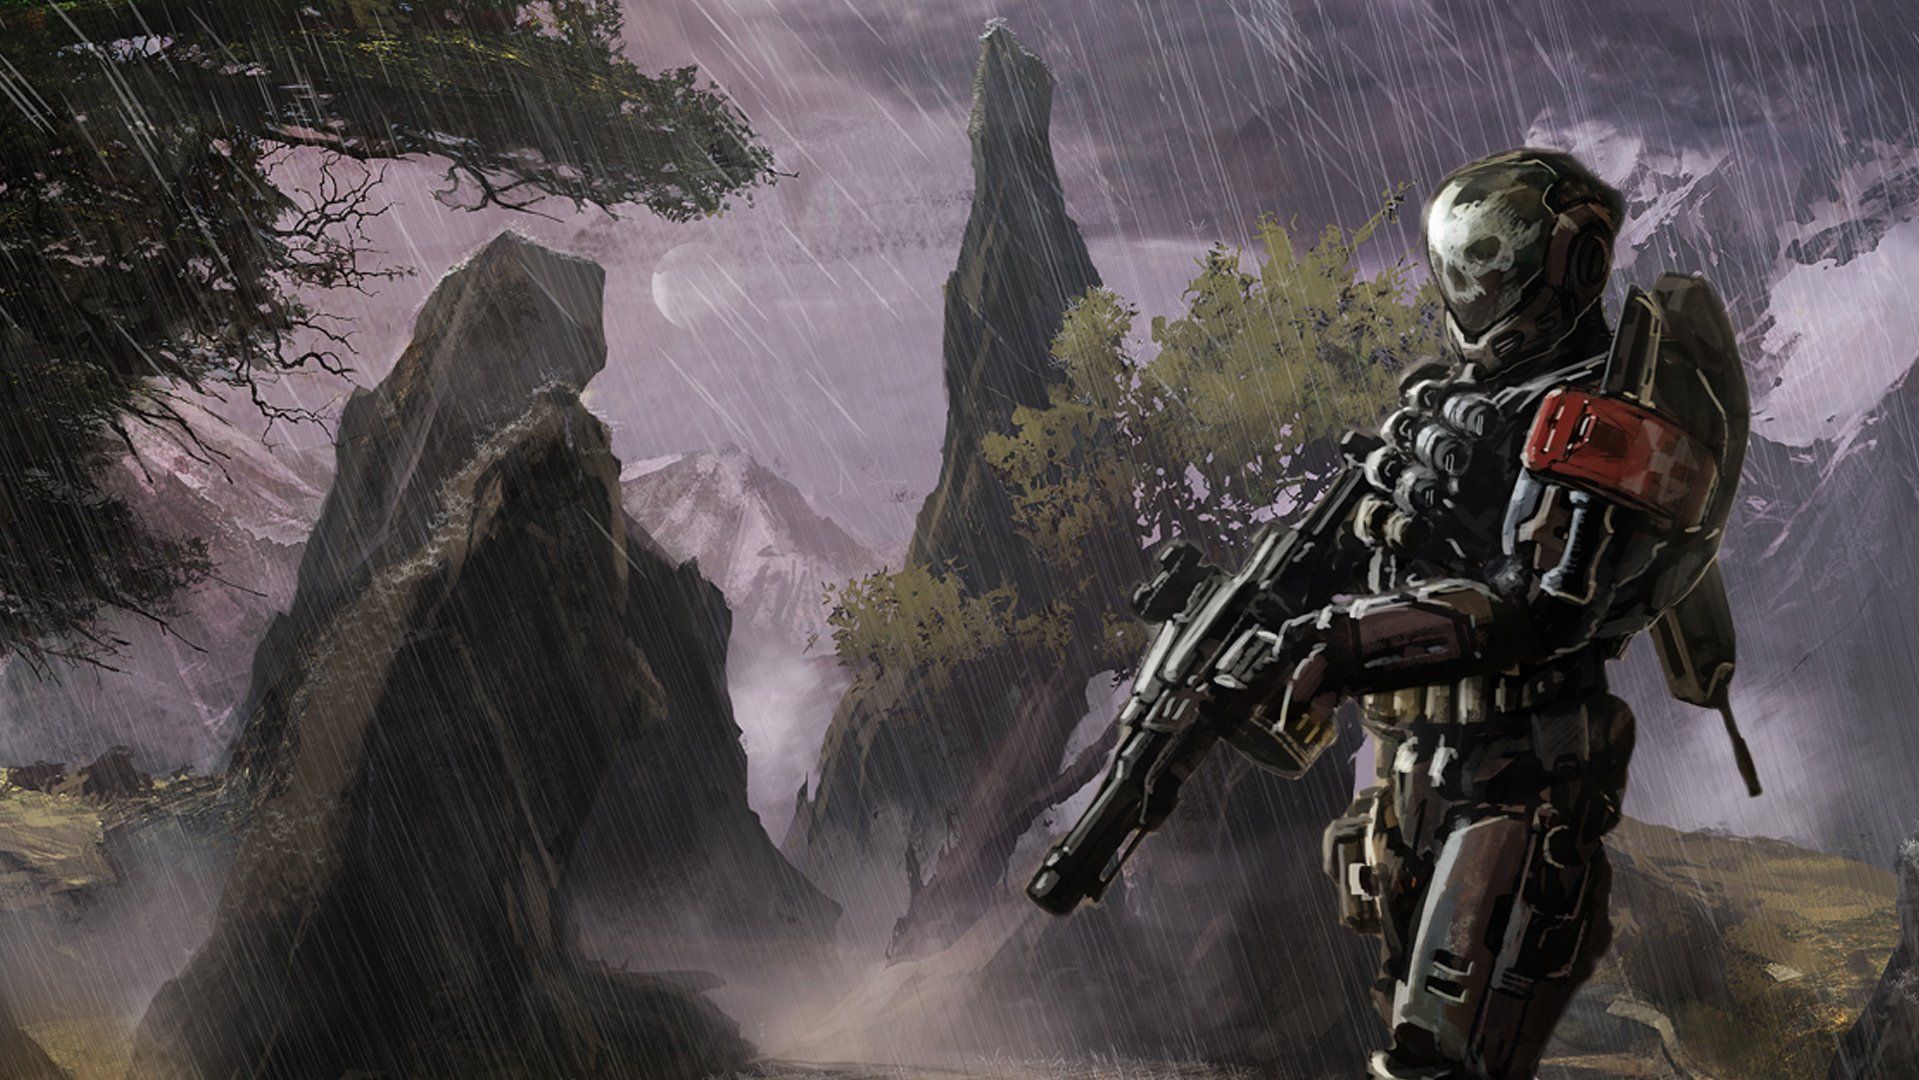 49+ Halo Reach Emile Wallpapers.